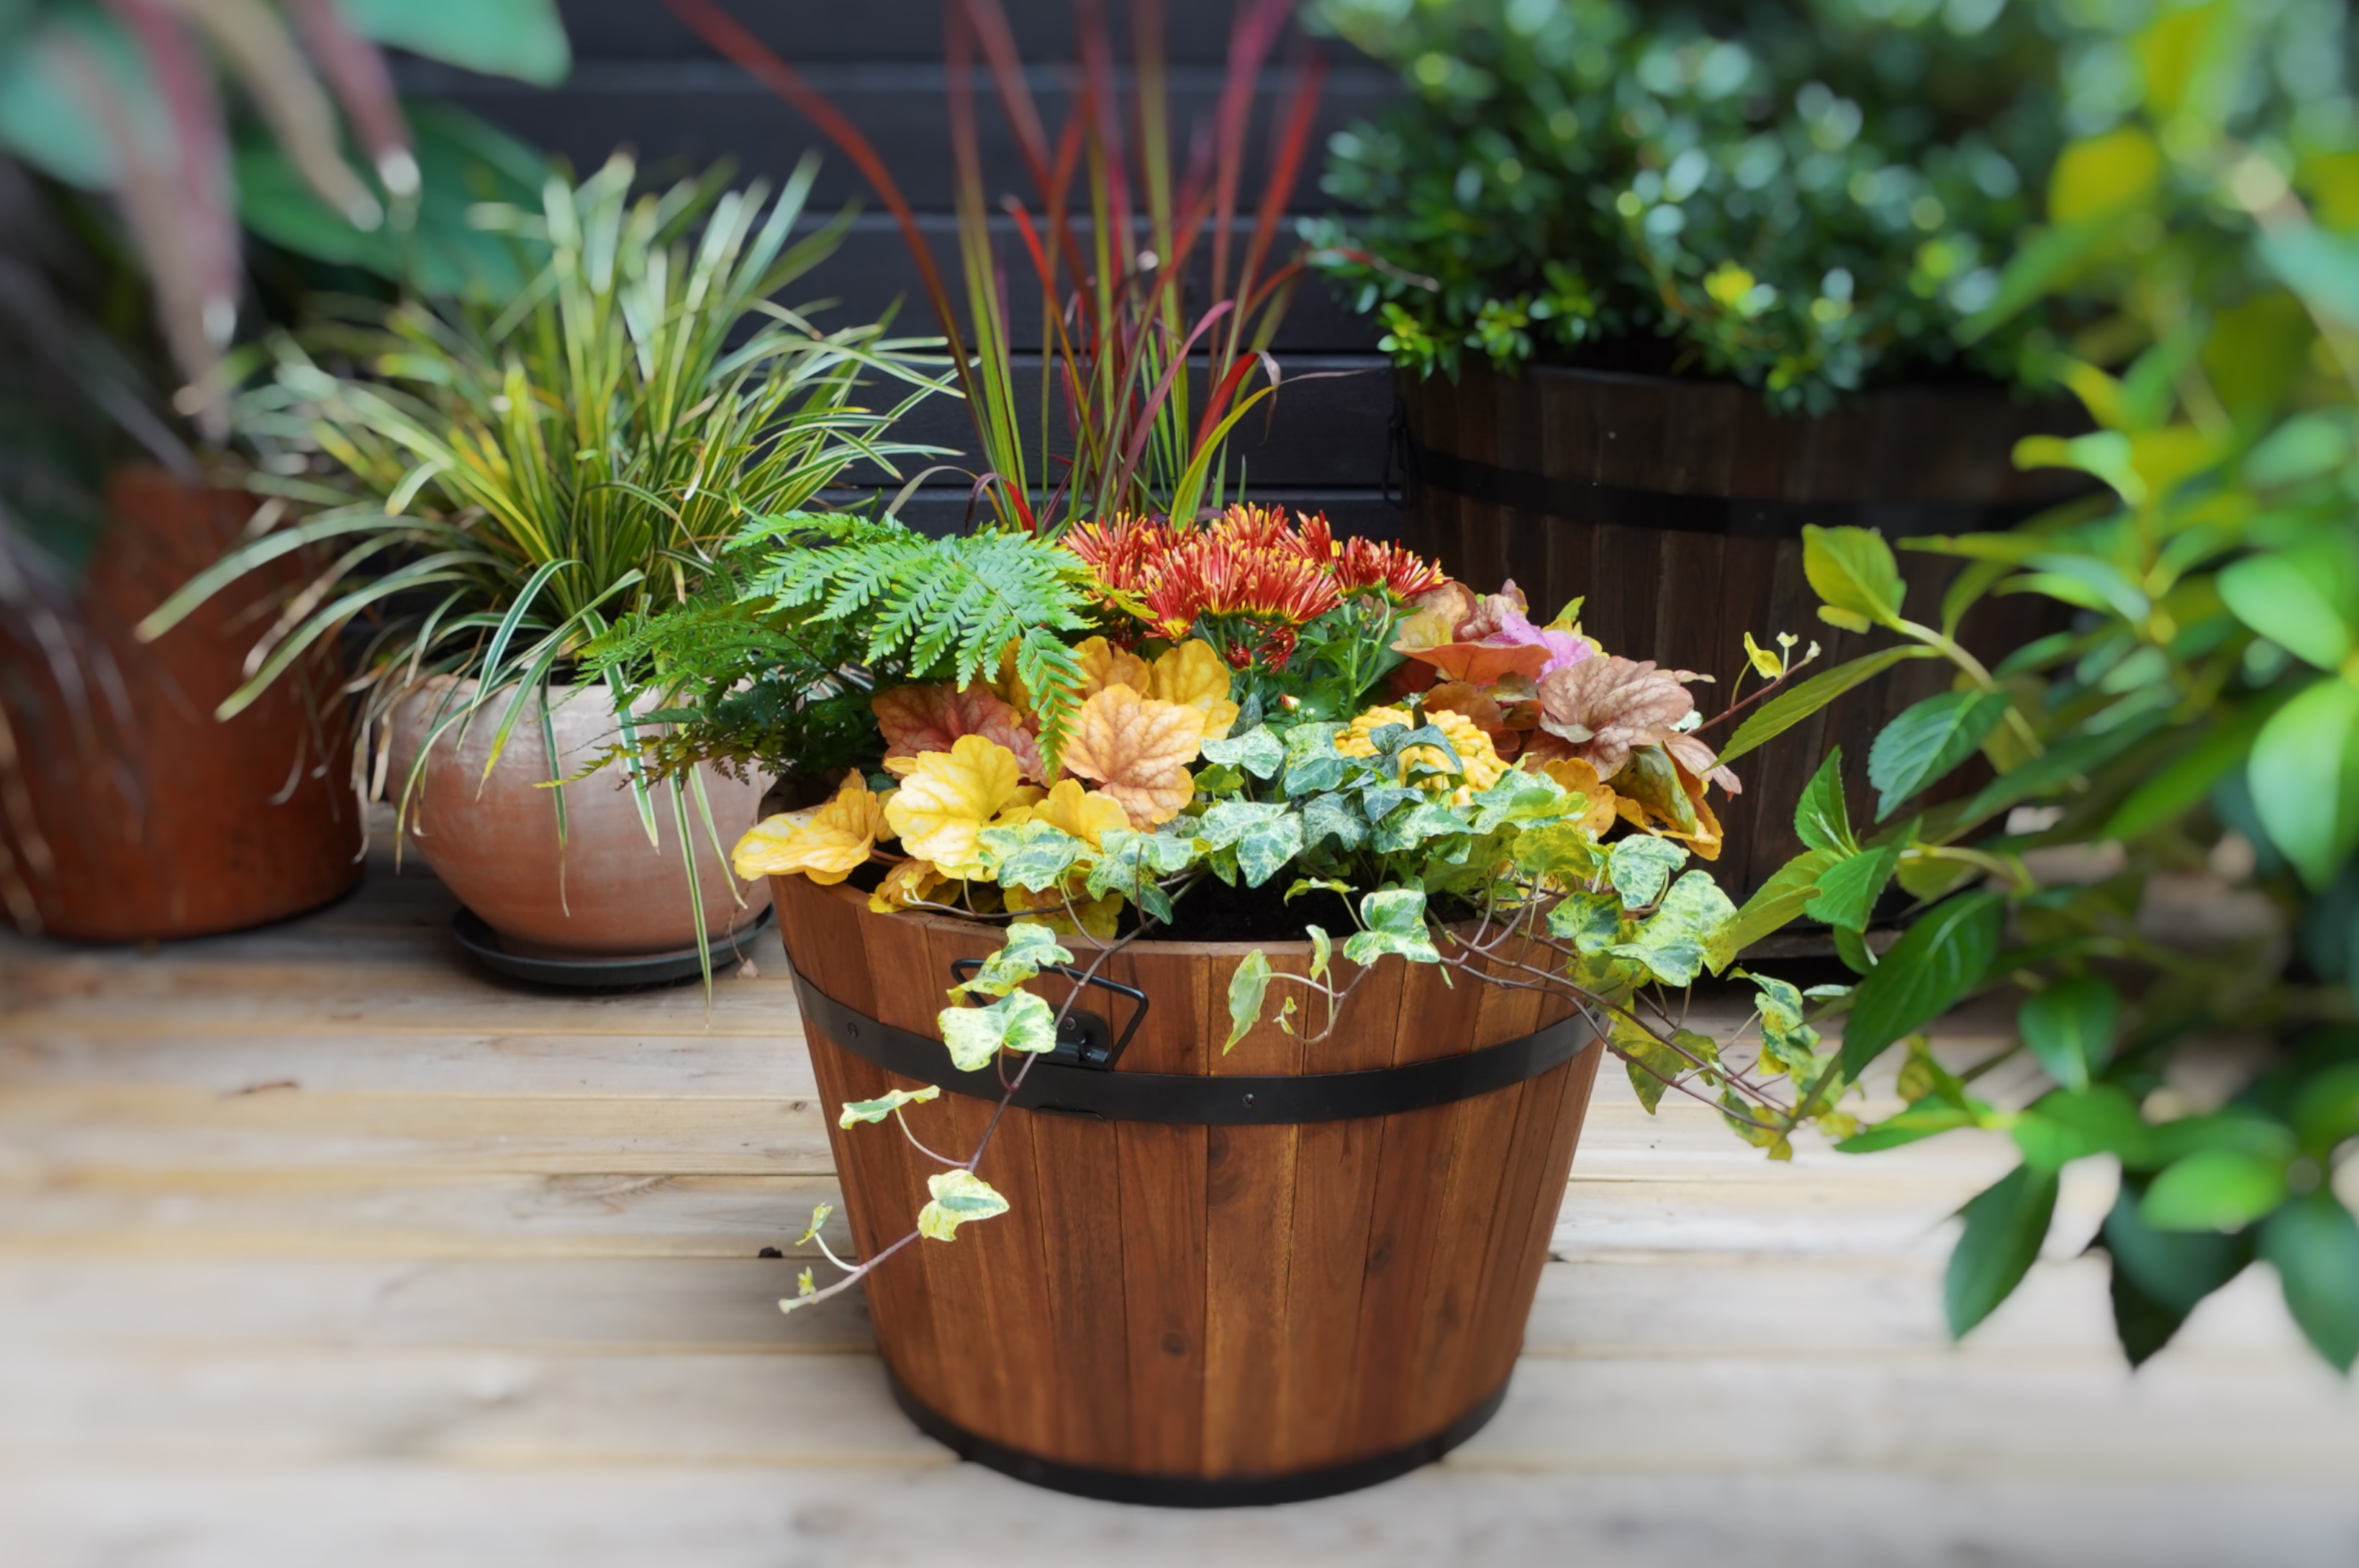 The best way to water your mixed outdoor container garden